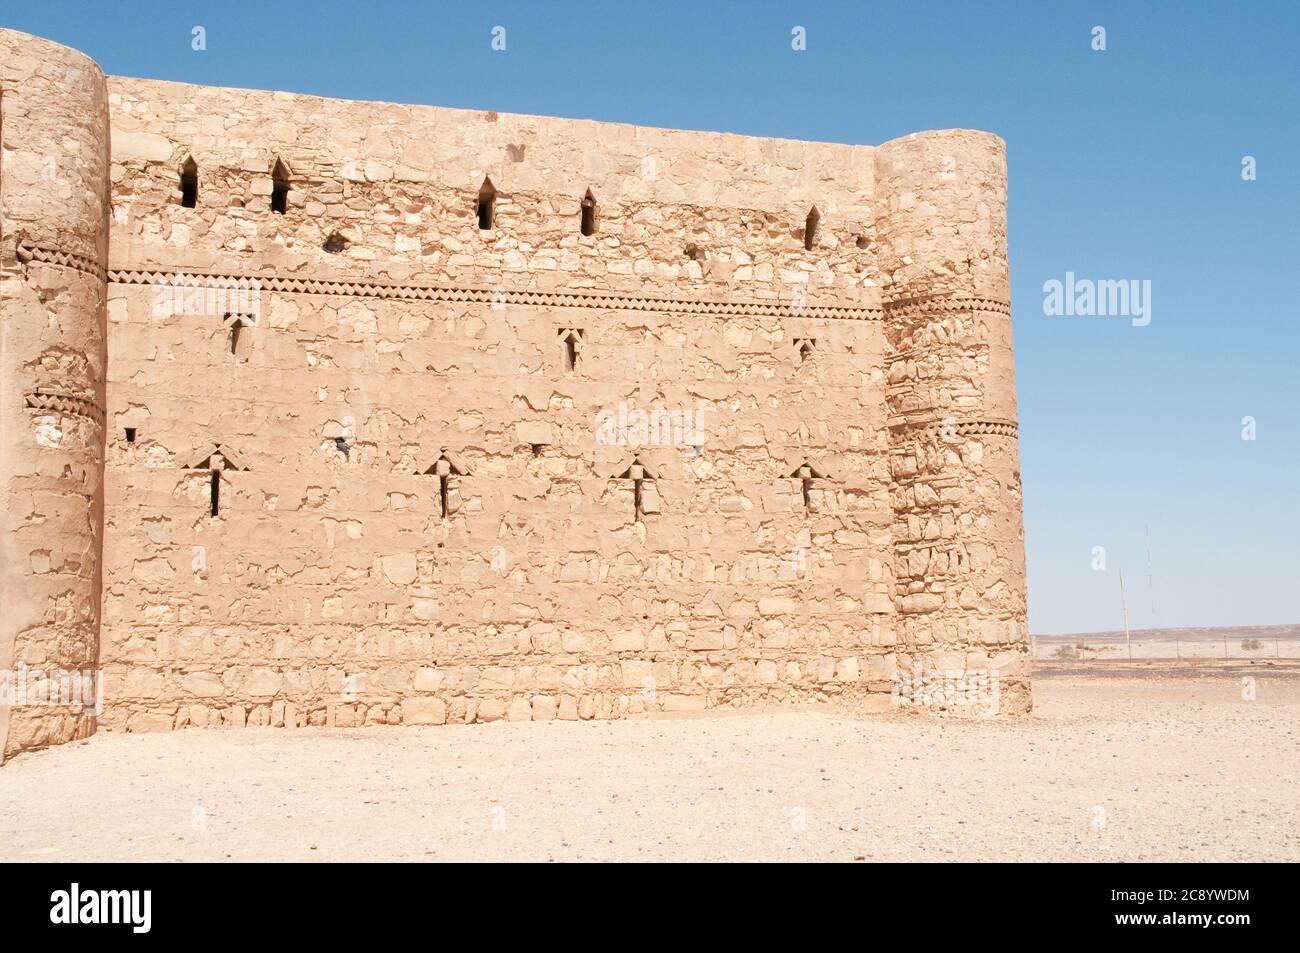 The exterior of the eastern desert castle of Qasr al-Kharanah near the town of Azraq oasis, in the Badia region of the Hashemite Kingdom of Jordan. Stock Photo